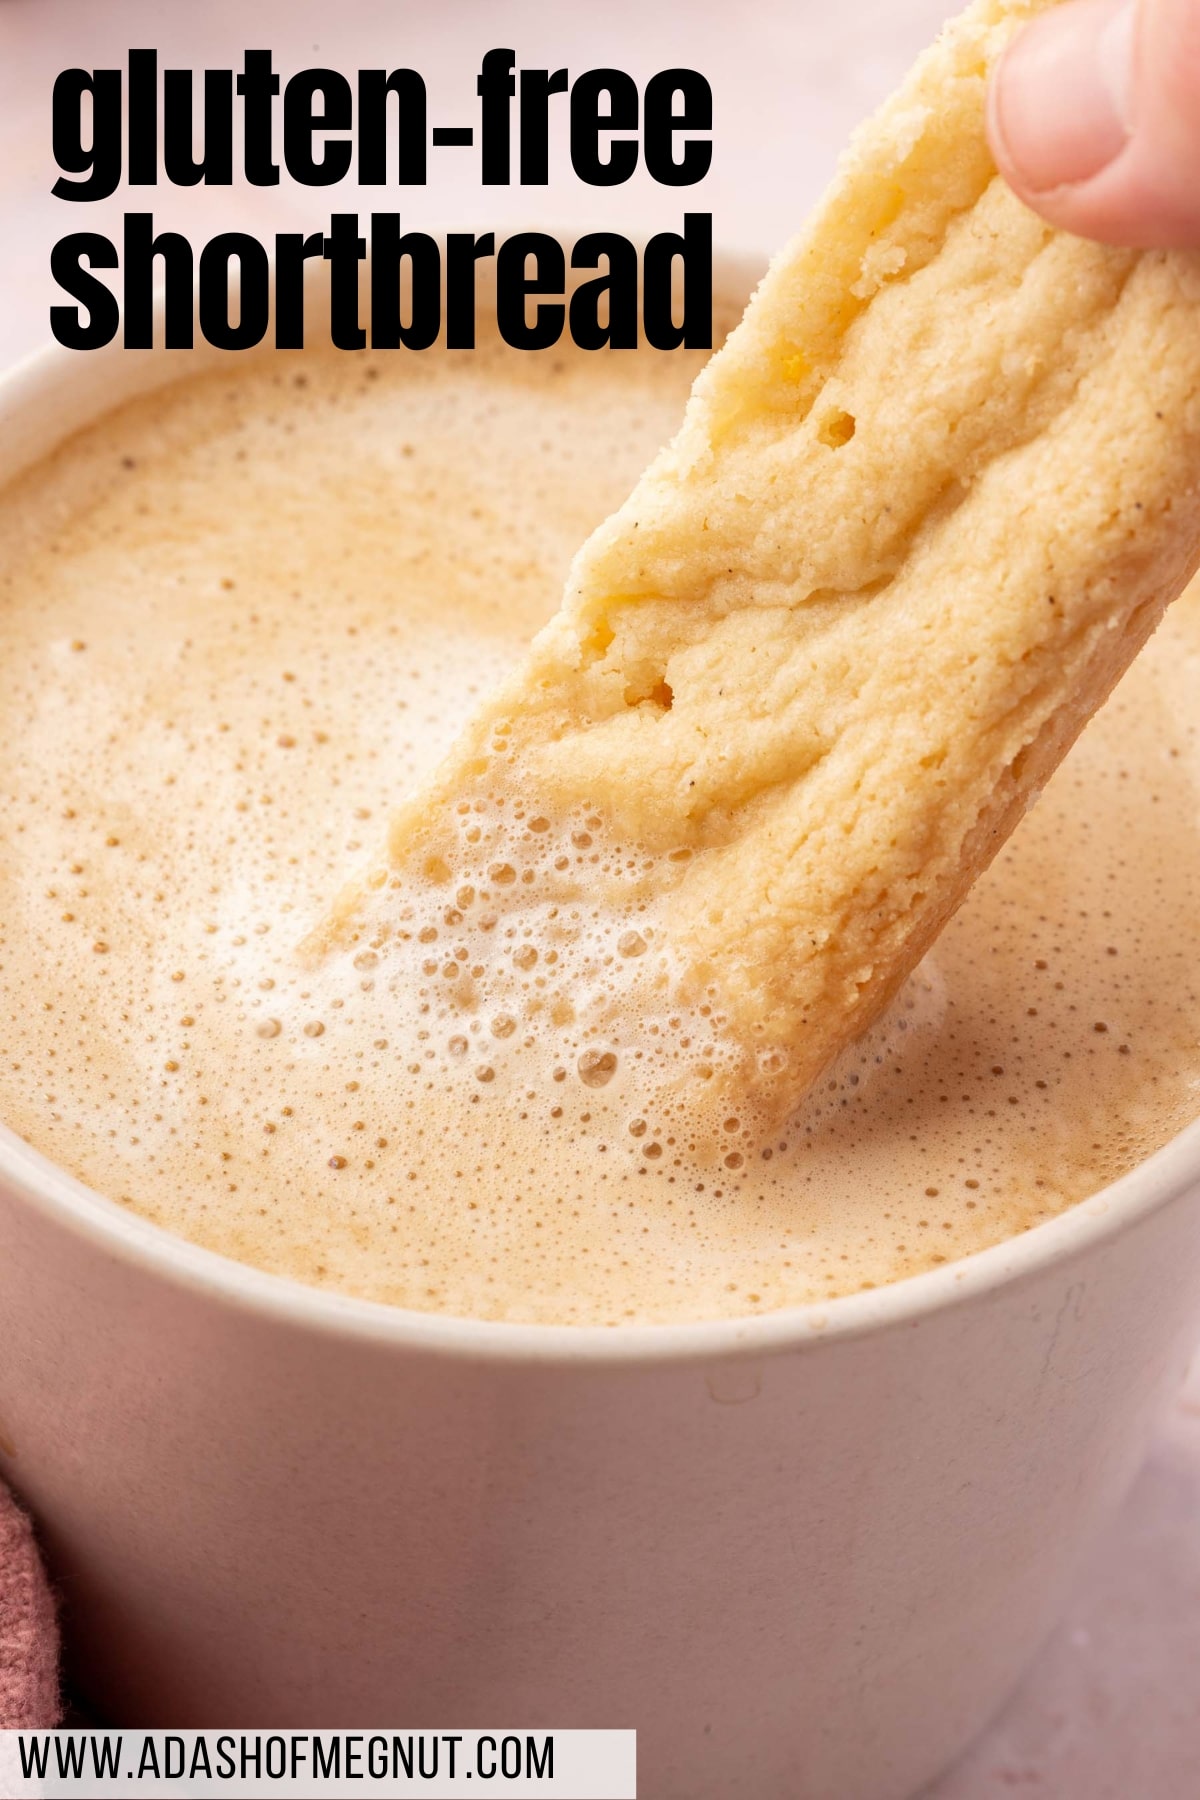 A close up of a gluten-free shortbread finger being dipped into a latte.